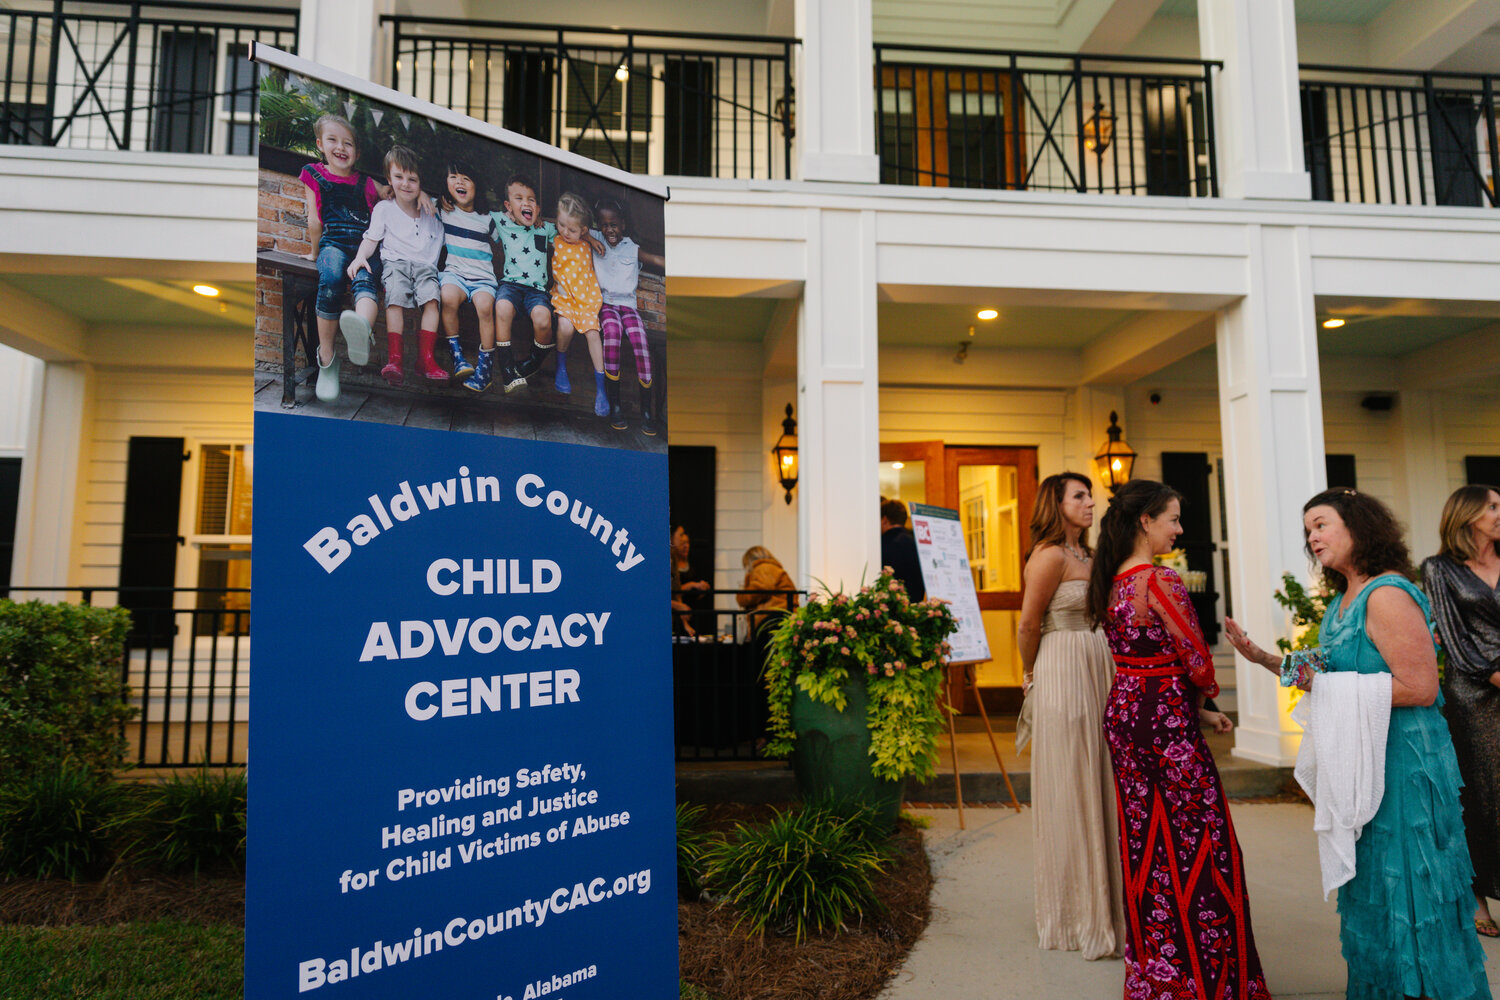 On Nov. 2, the Baldwin County Child Advocacy Center held their inaugural fall ball, raising money and awareness for child abuse. Gov. Kay Ivey announced that the BCCAC would receive a grant to fund their program. “Without this grant, it would make it extremely difficult for us to be able to provide these free services that we provide,” said BCCAC executive director Nikki Whitaker. “We do receive some support from municipalities, and I'll say from the county, but not all municipalities are supportive of the agency. It does make a tremendous difference that our state does allow us to apply for these victims. So, it is certainly important, because without it, it would be extremely difficult for us to be able to function.”